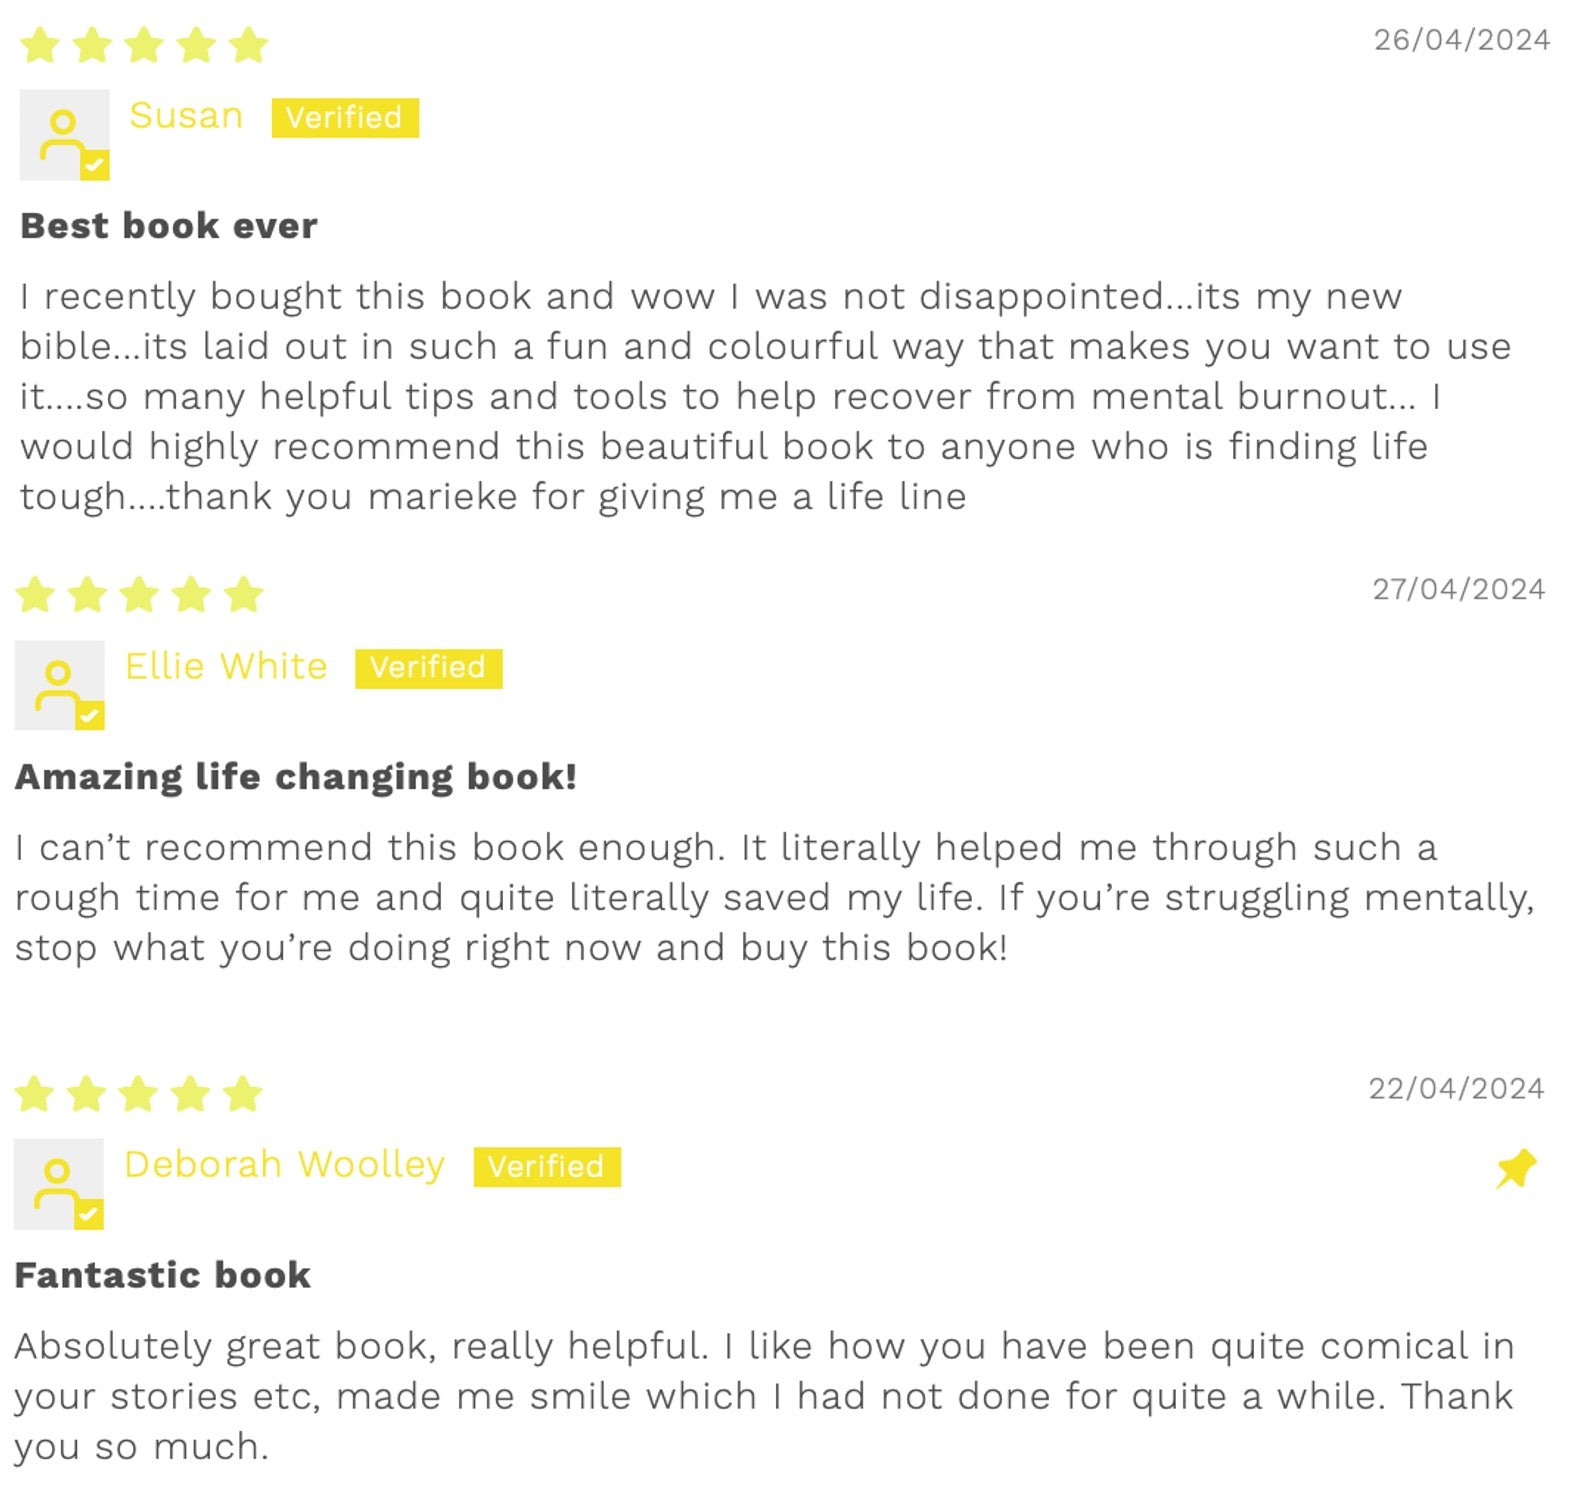 What people say about the book